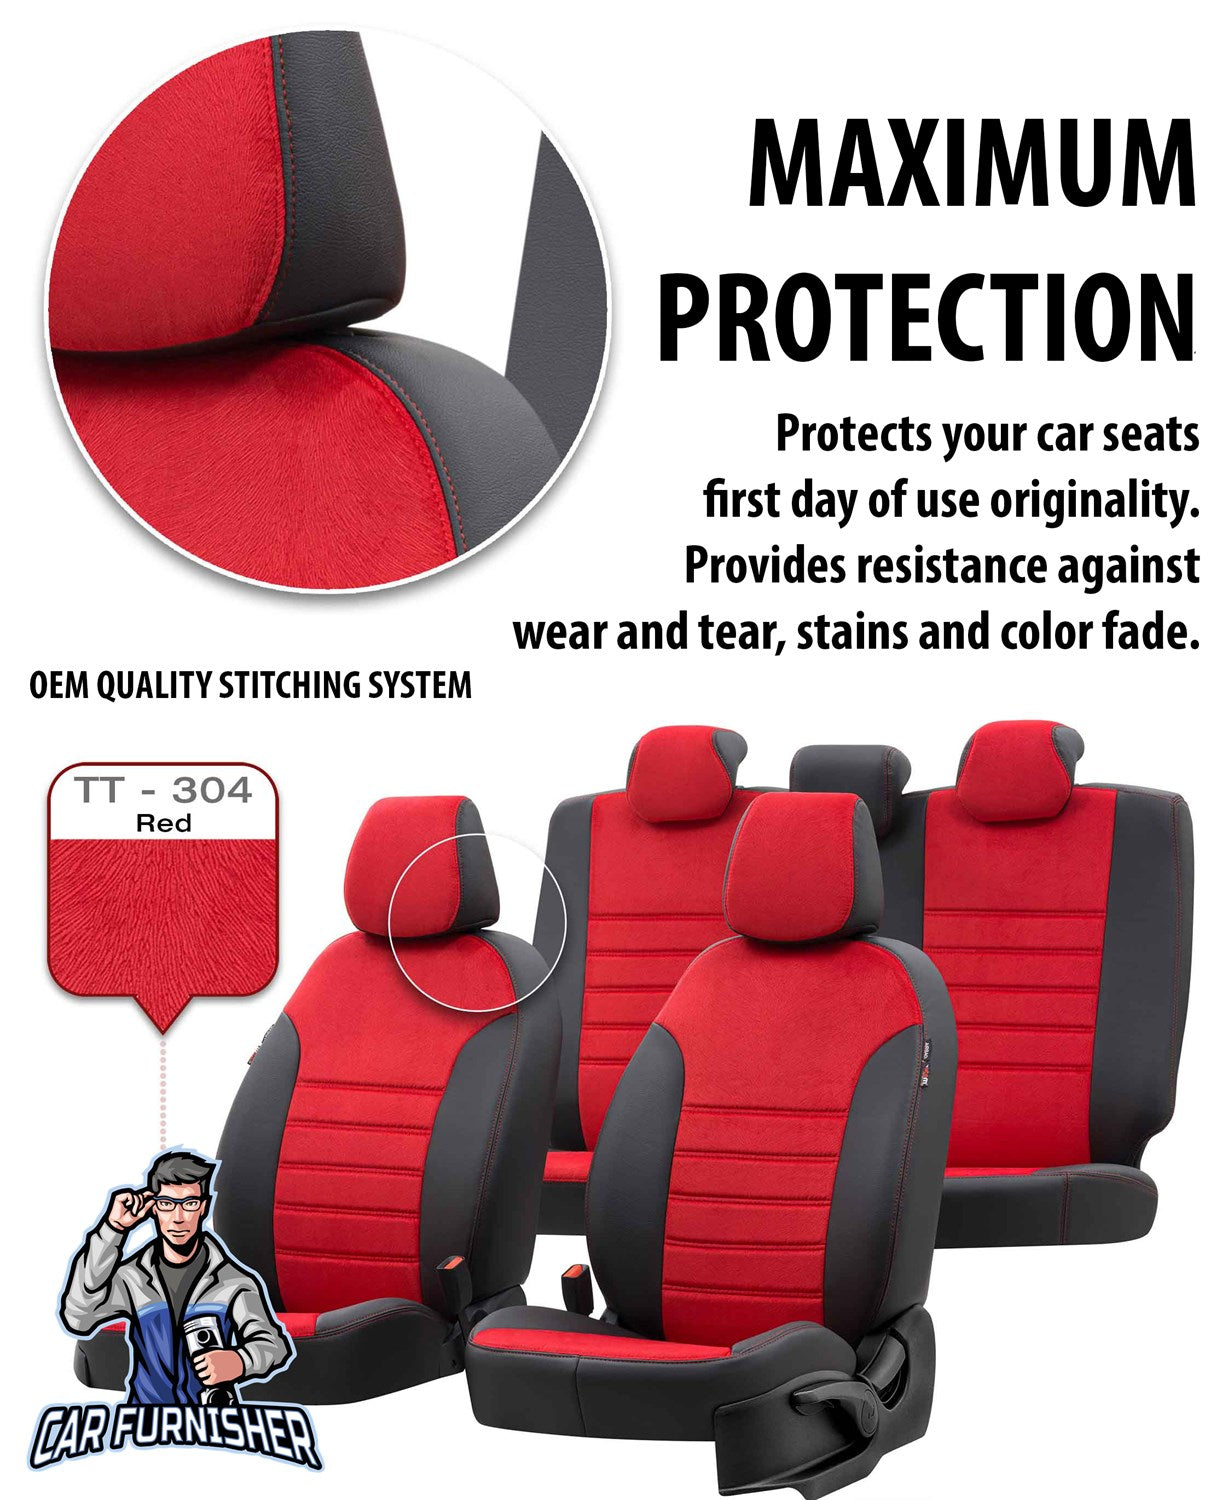 Chevrolet Aveo Car Seat Cover 2003-2023 T200/T250/T300 London Smoked Full Set (5 Seats + Handrest) Leather & Fabric